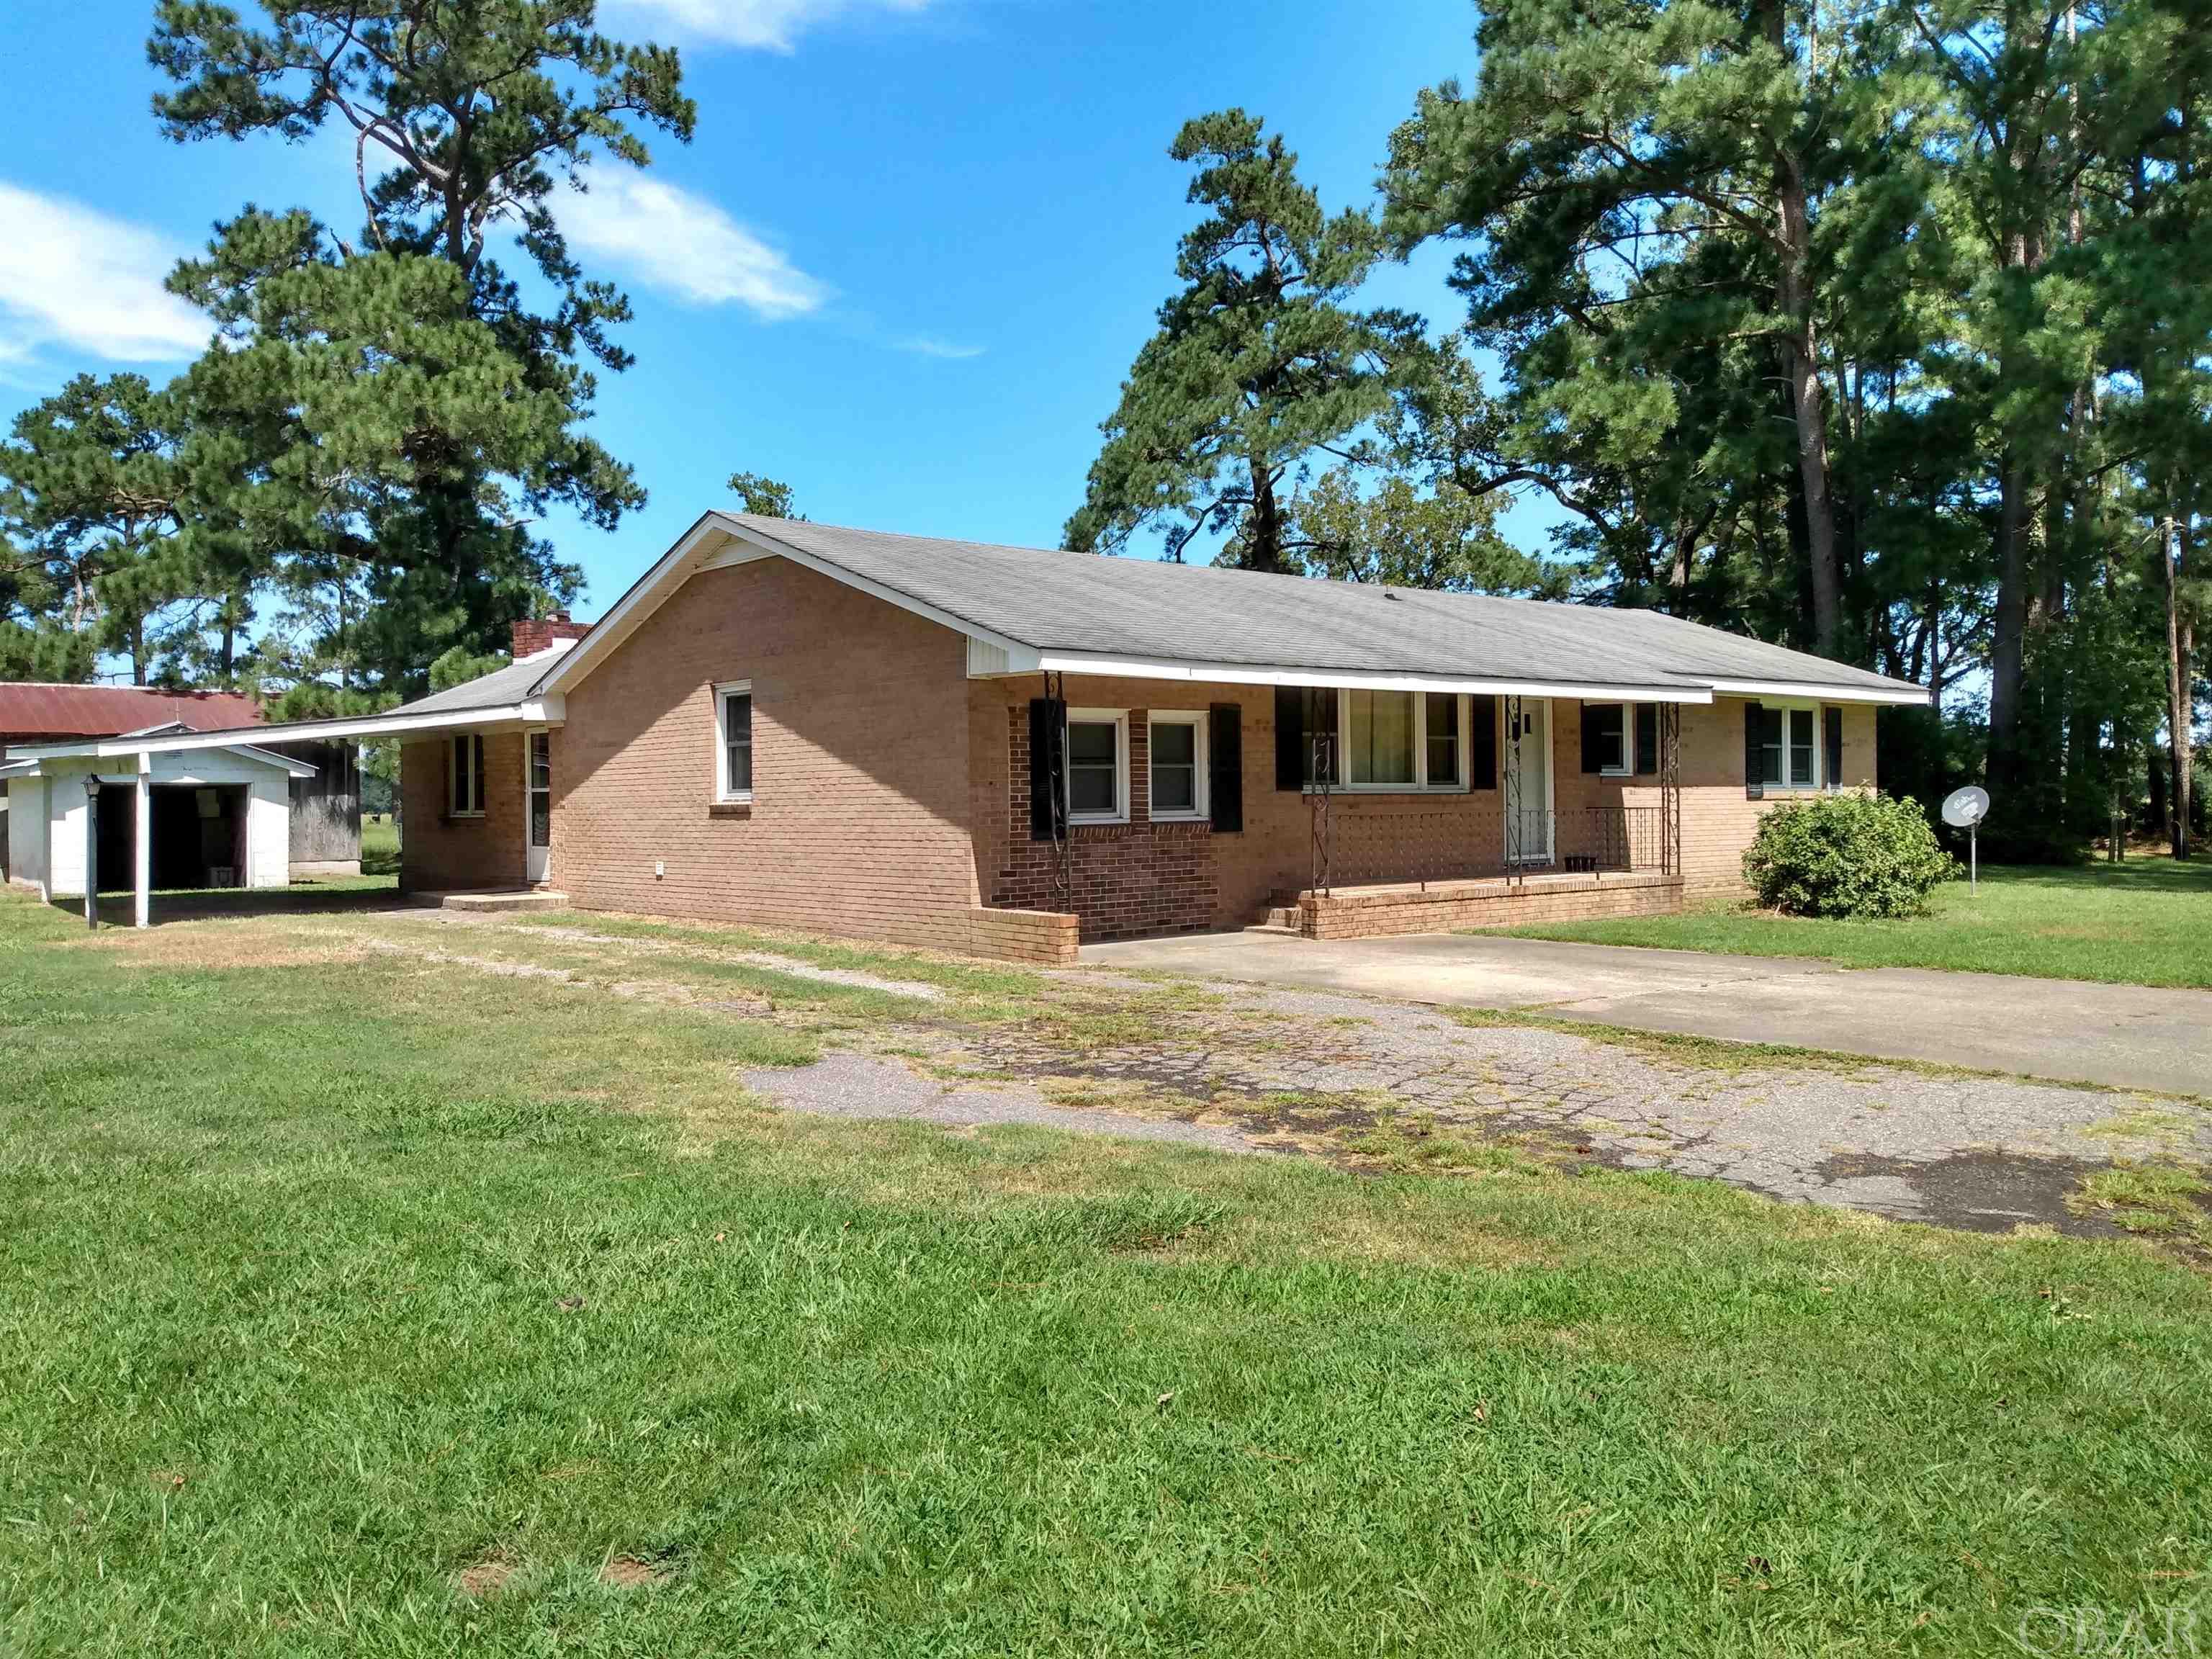 Nice 3BR, 2BA Brick Ranch Home with large family room, hardwood floors, fireplace, carport and storage-workshop. Excellent rental property. Readily accessible and conveniently located just 3.5 west of Columbia, N.C. off of US highway 64 (Travis Exit). Within an hour from Nags Head, N.C. Ready to move in! Priced to sell!